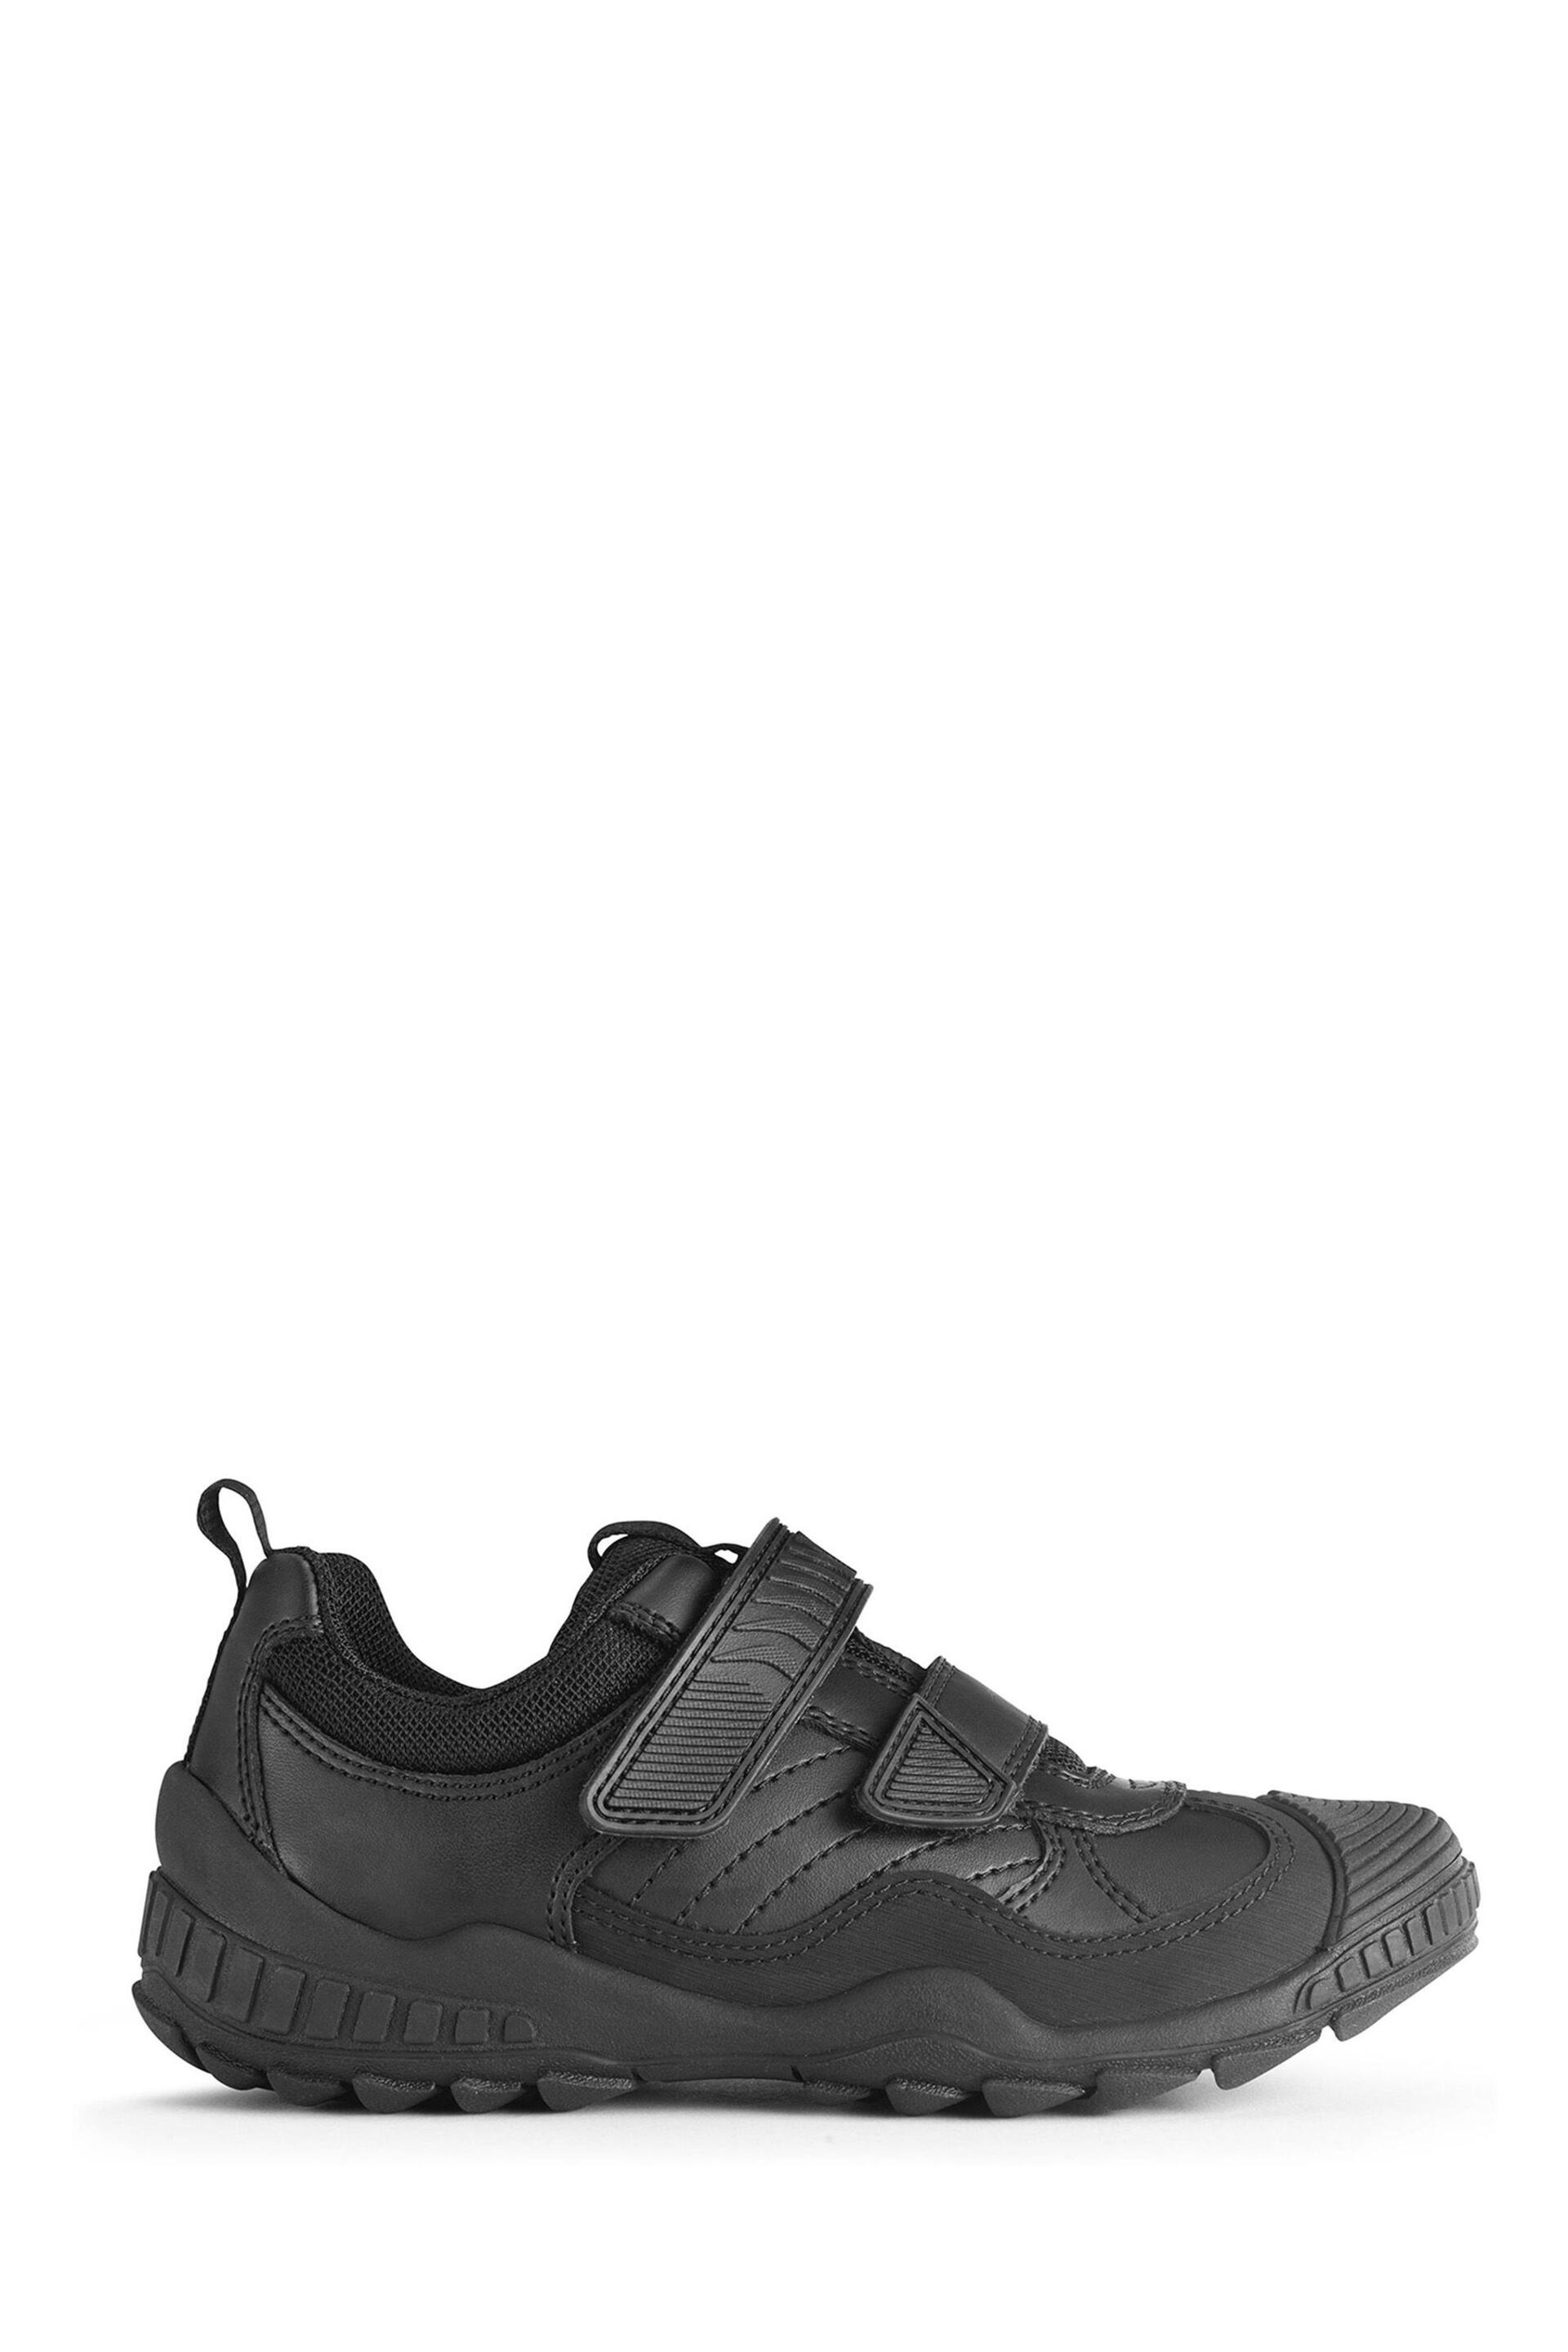 Start-Rite Extreme Pri Black Leather School Shoes F Fit - Image 1 of 5